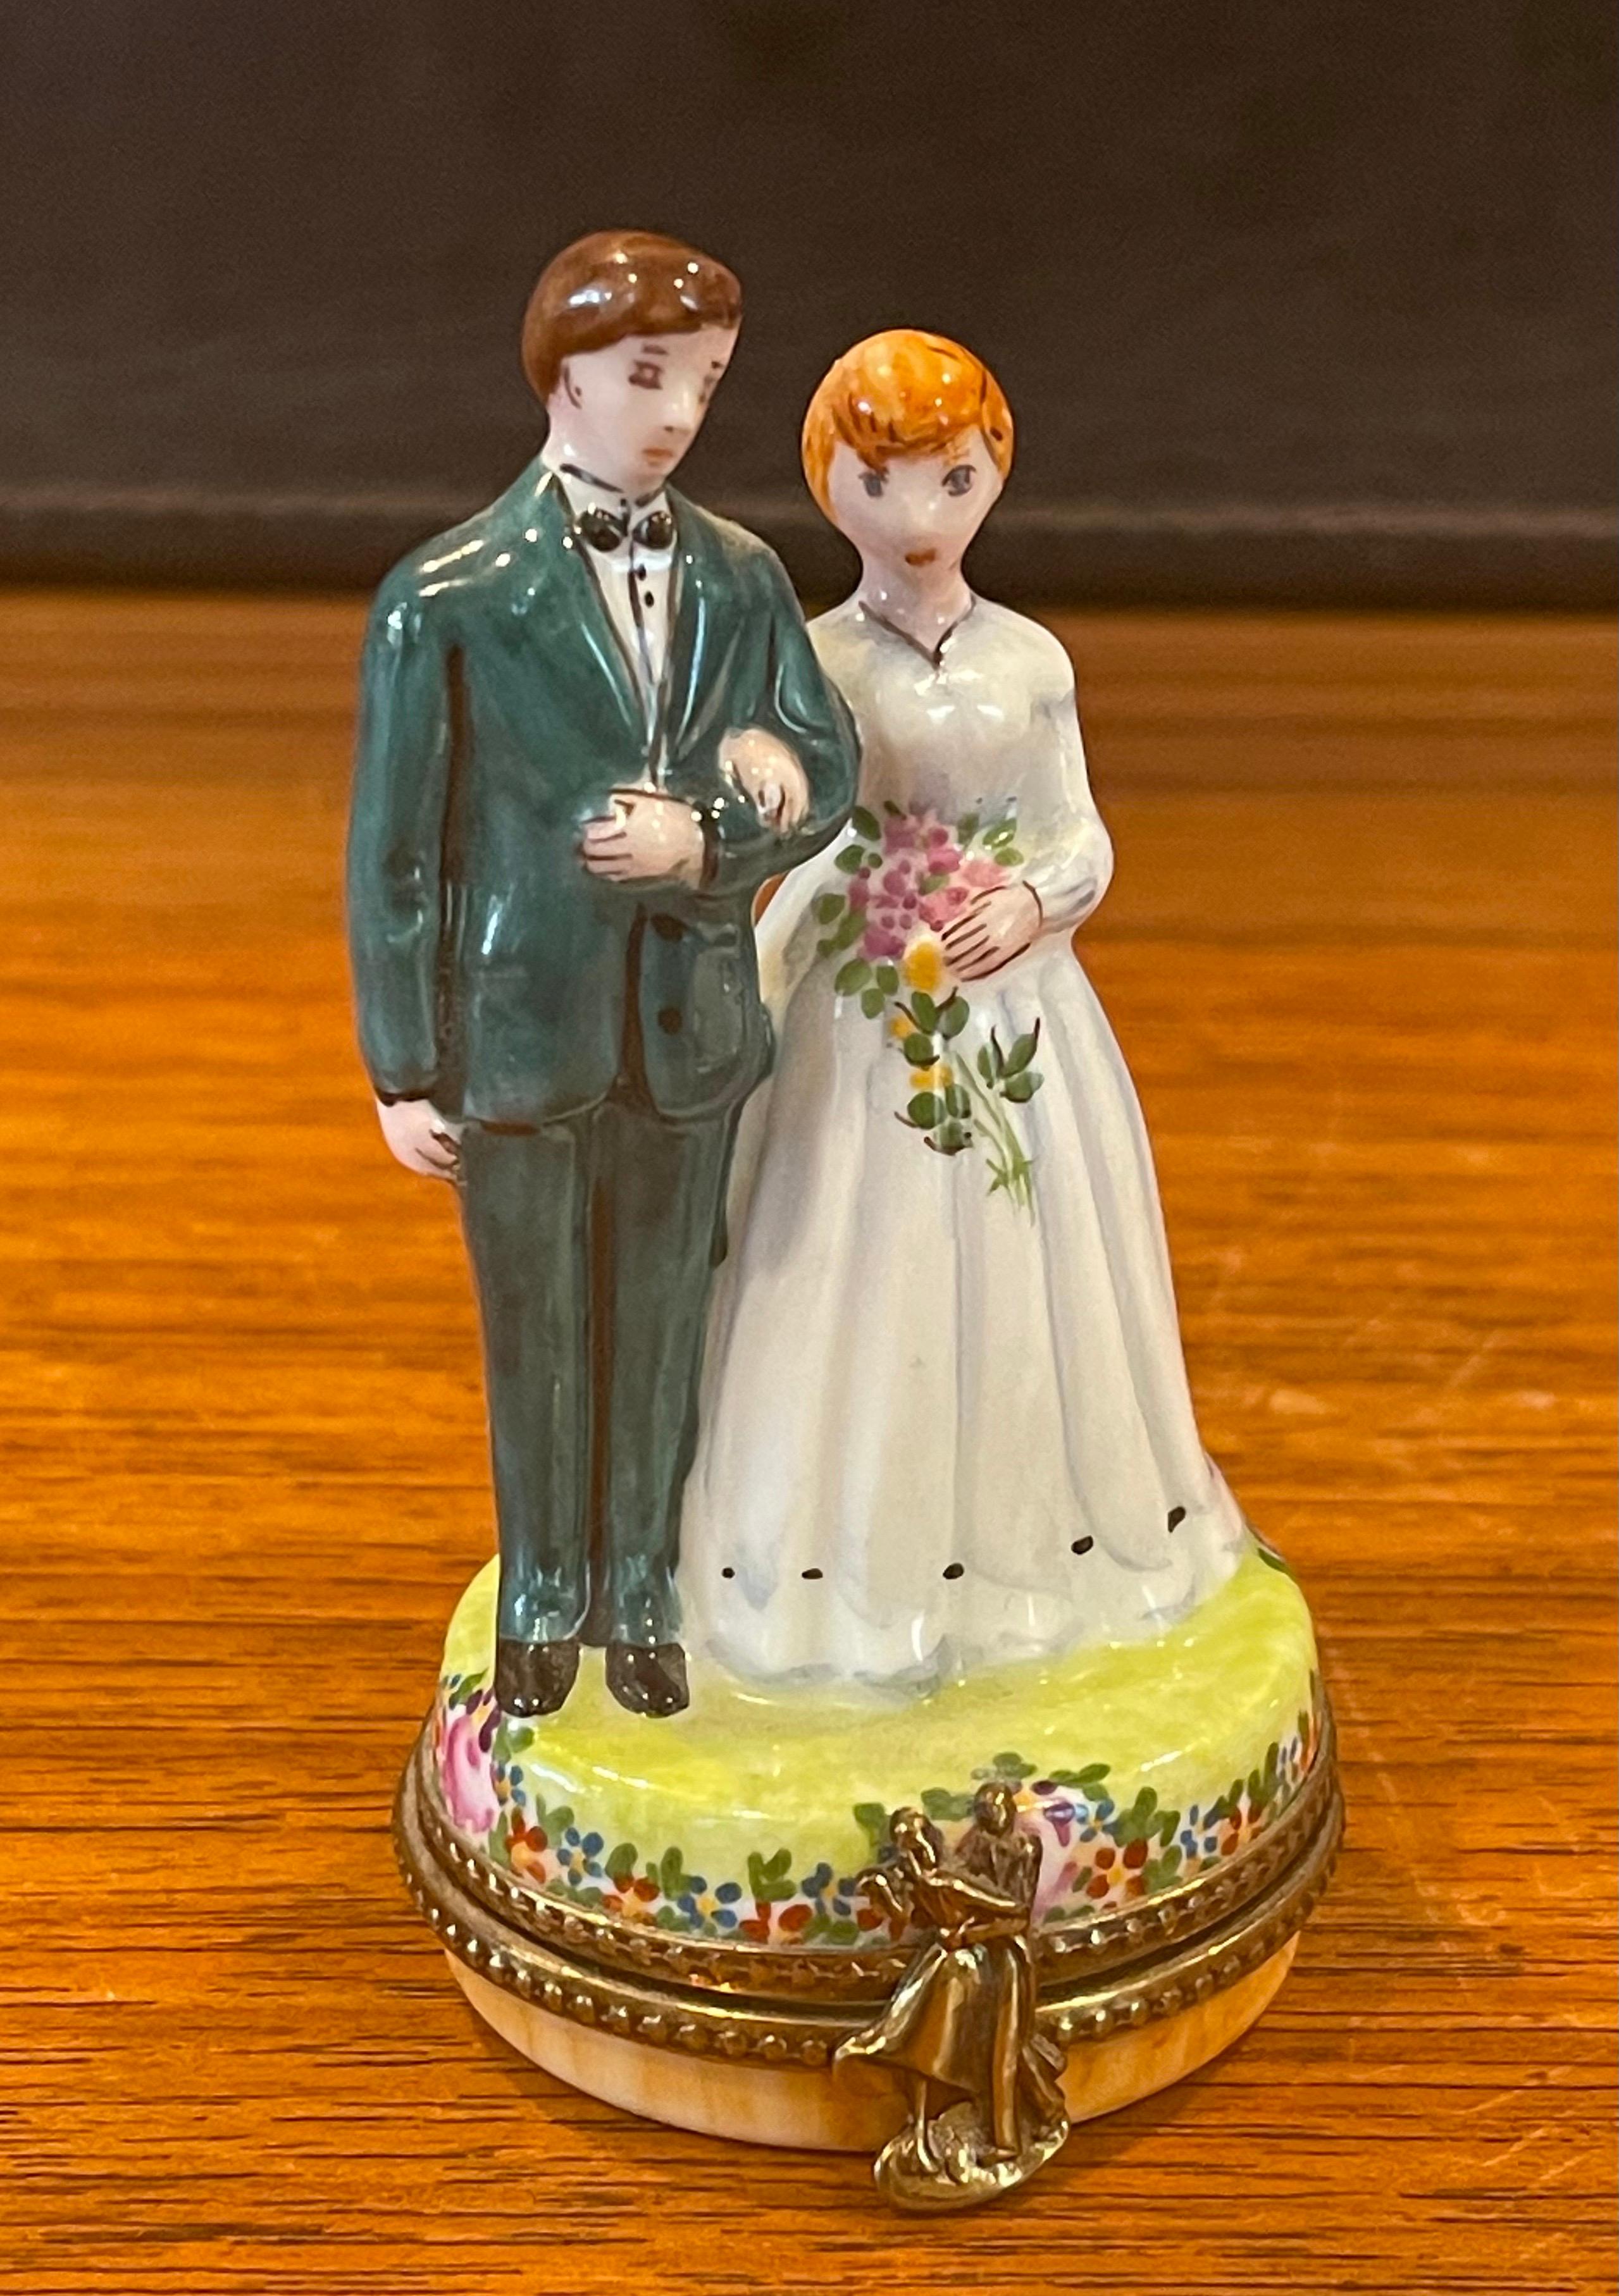 Beautiful porcelain peint main (hand painted) bride & groom / wedding couple trinket box by Rochard for Limoges, circa 1970s. This unusual piece is in very good vintage condition and measures 1.5